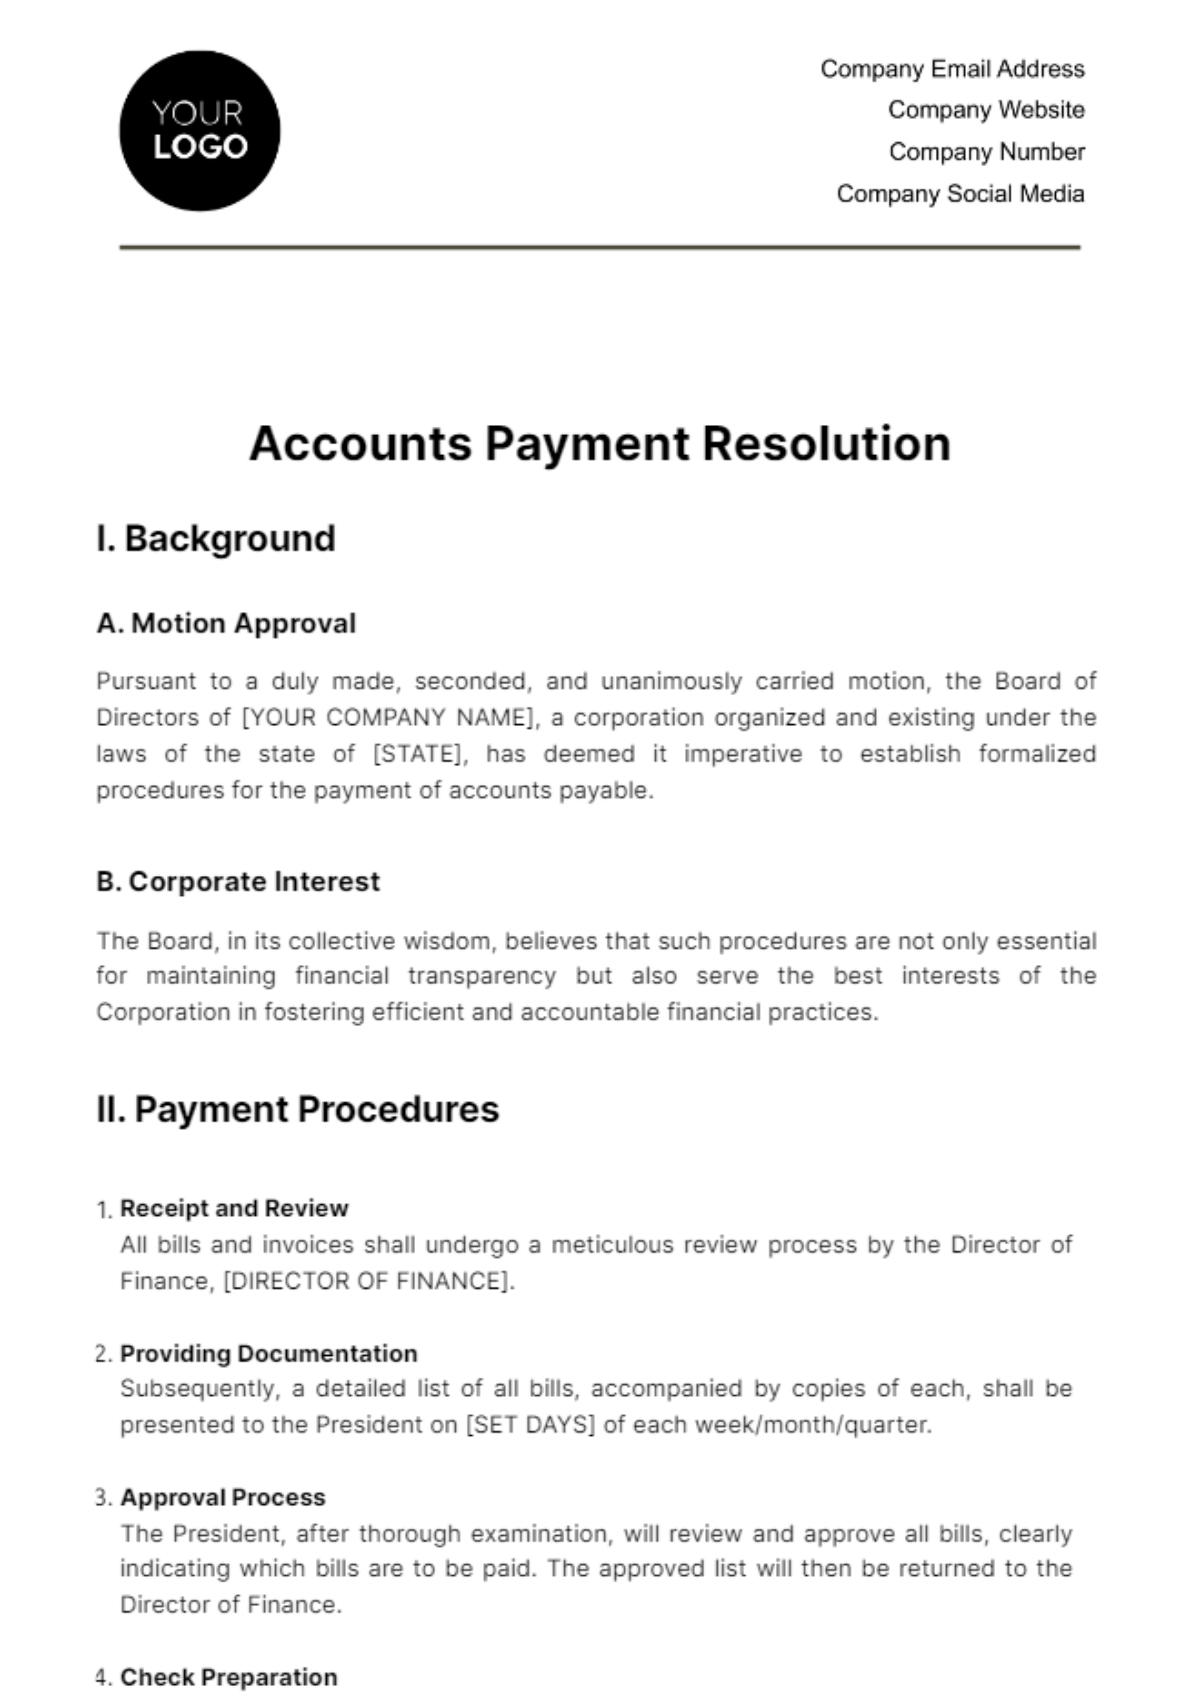 Accounts Payment Resolution Template